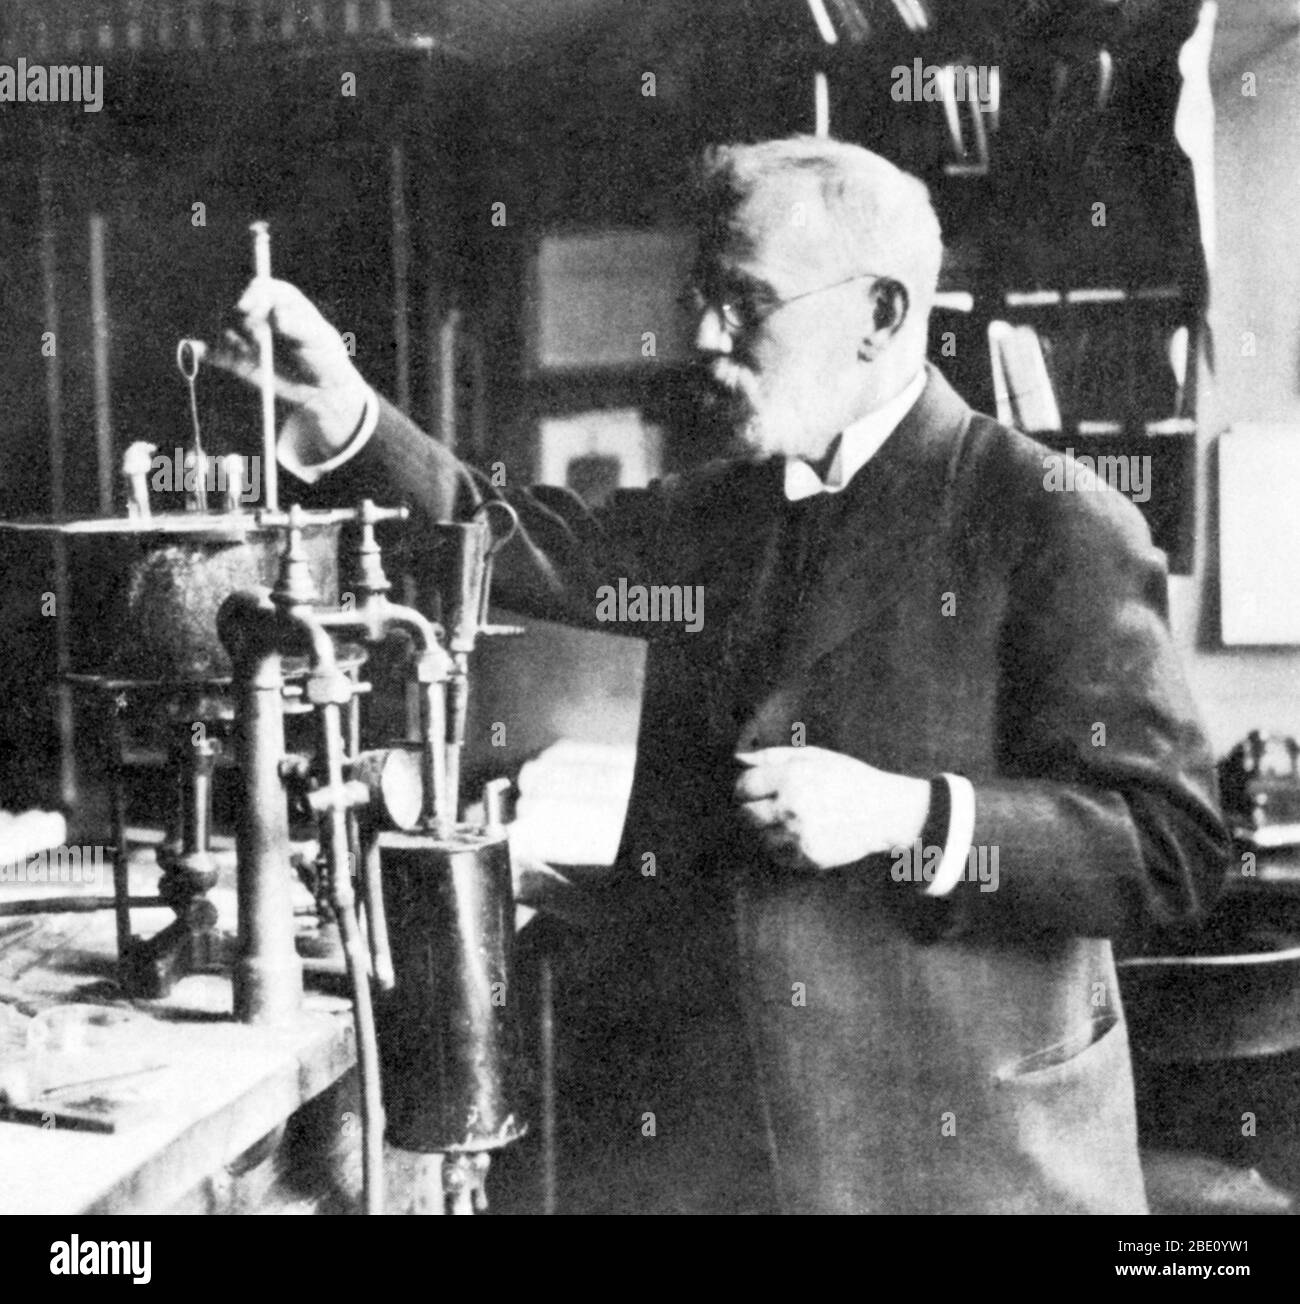 Ehrlich performing a set test pattern for chemotherapy with Salvarsan. Paul Ehrlich (March 14, 1854-August 20, 1915) was a German physician and scientist who worked in the fields of hematology, immunology, and chemotherapy. The methods he developed for staining tissue made it possible to distinguish between different type of blood cells, which led to the capability to diagnose numerous blood diseases. His laboratory discovered Arsphenamine (Salvarsan), the first effective medicinal treatment for syphilis, thereby initiating and also naming the concept of chemotherapy. Ehrlich popularized the c Stock Photo